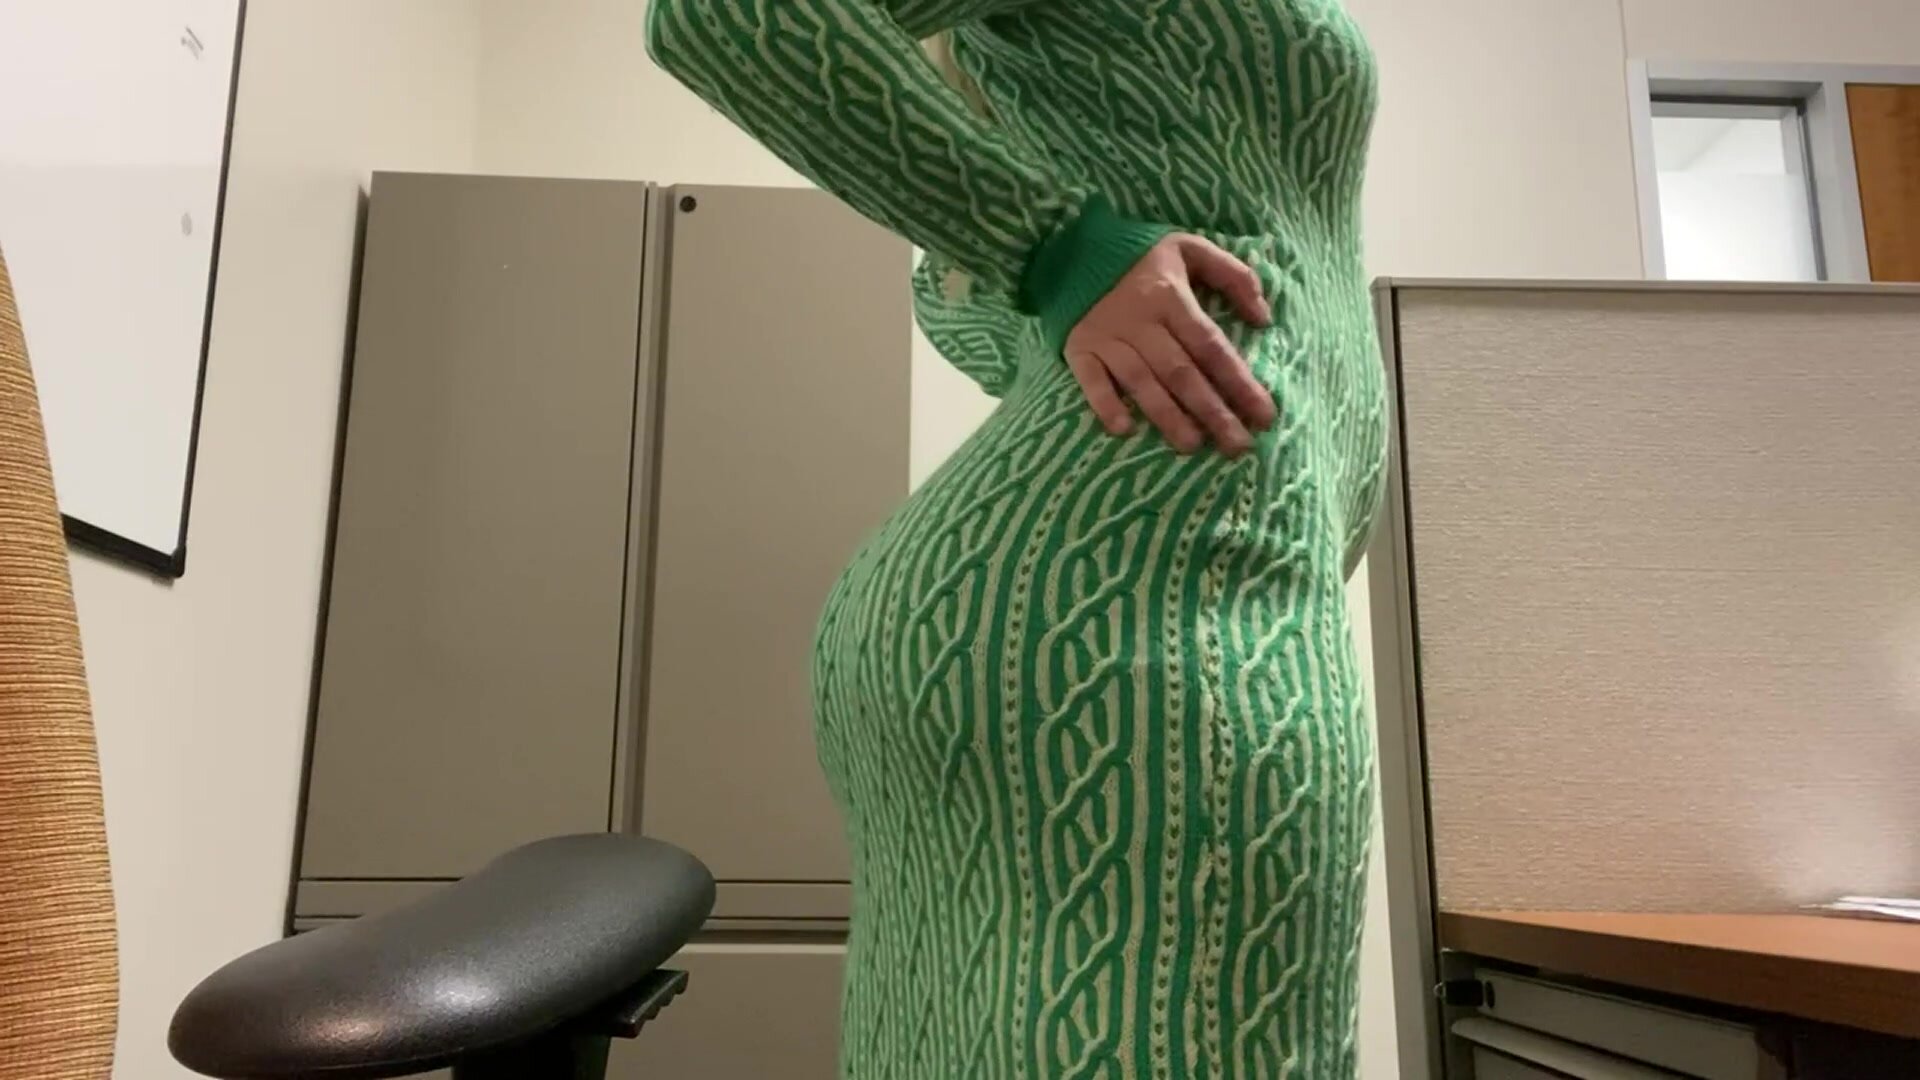 Sweater dress season is my favorite because I get to show off my huge ass at work